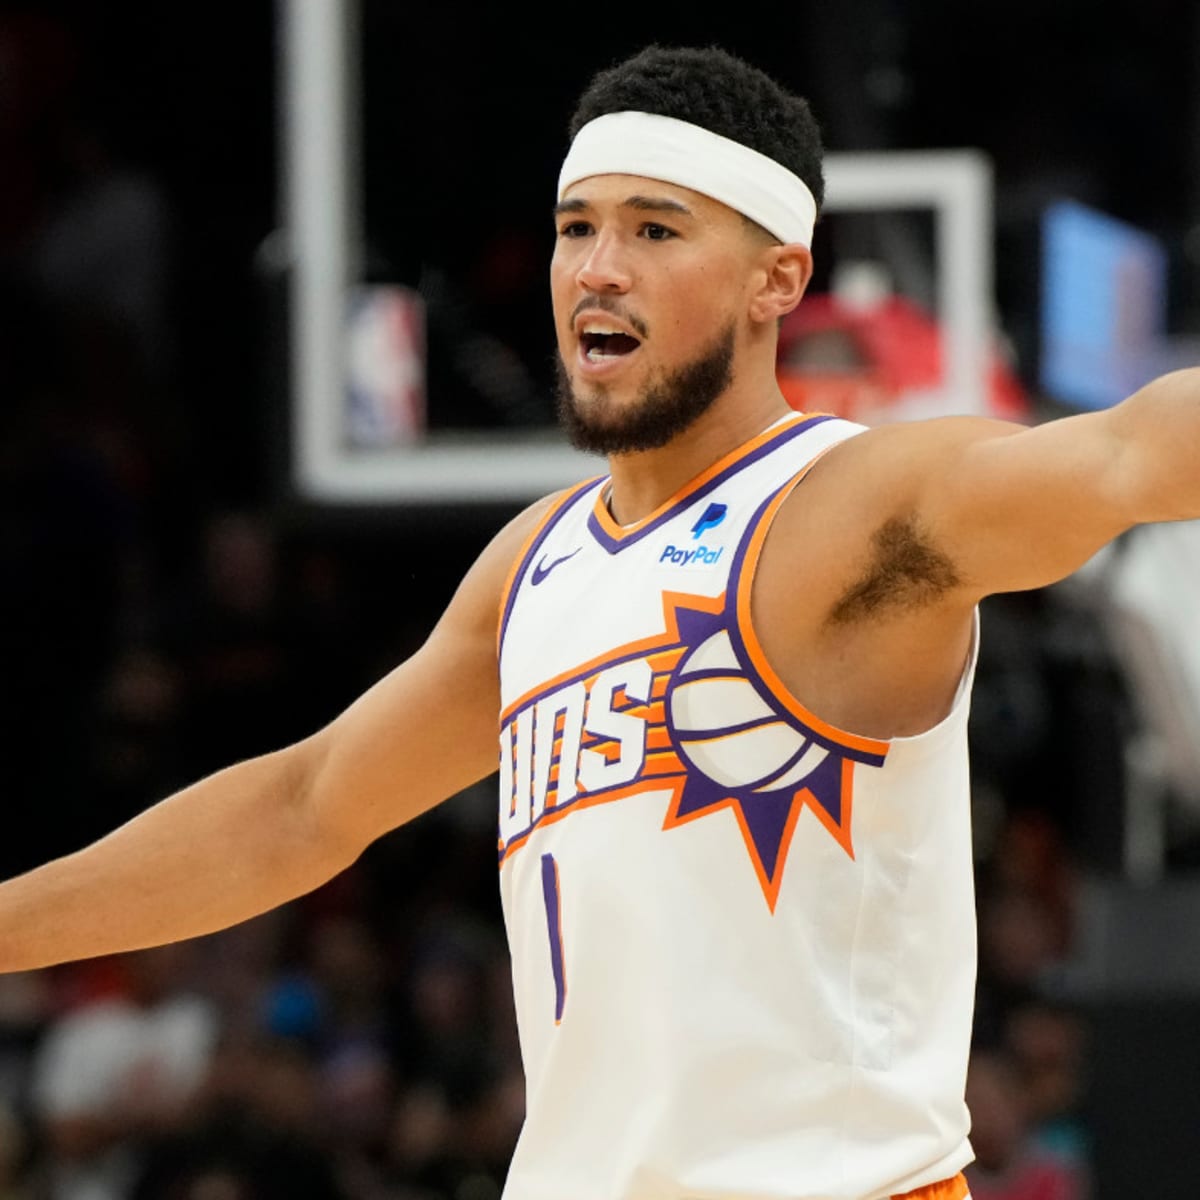 Phoenix Suns Guard Devin Booker Named to All-NBA First Team